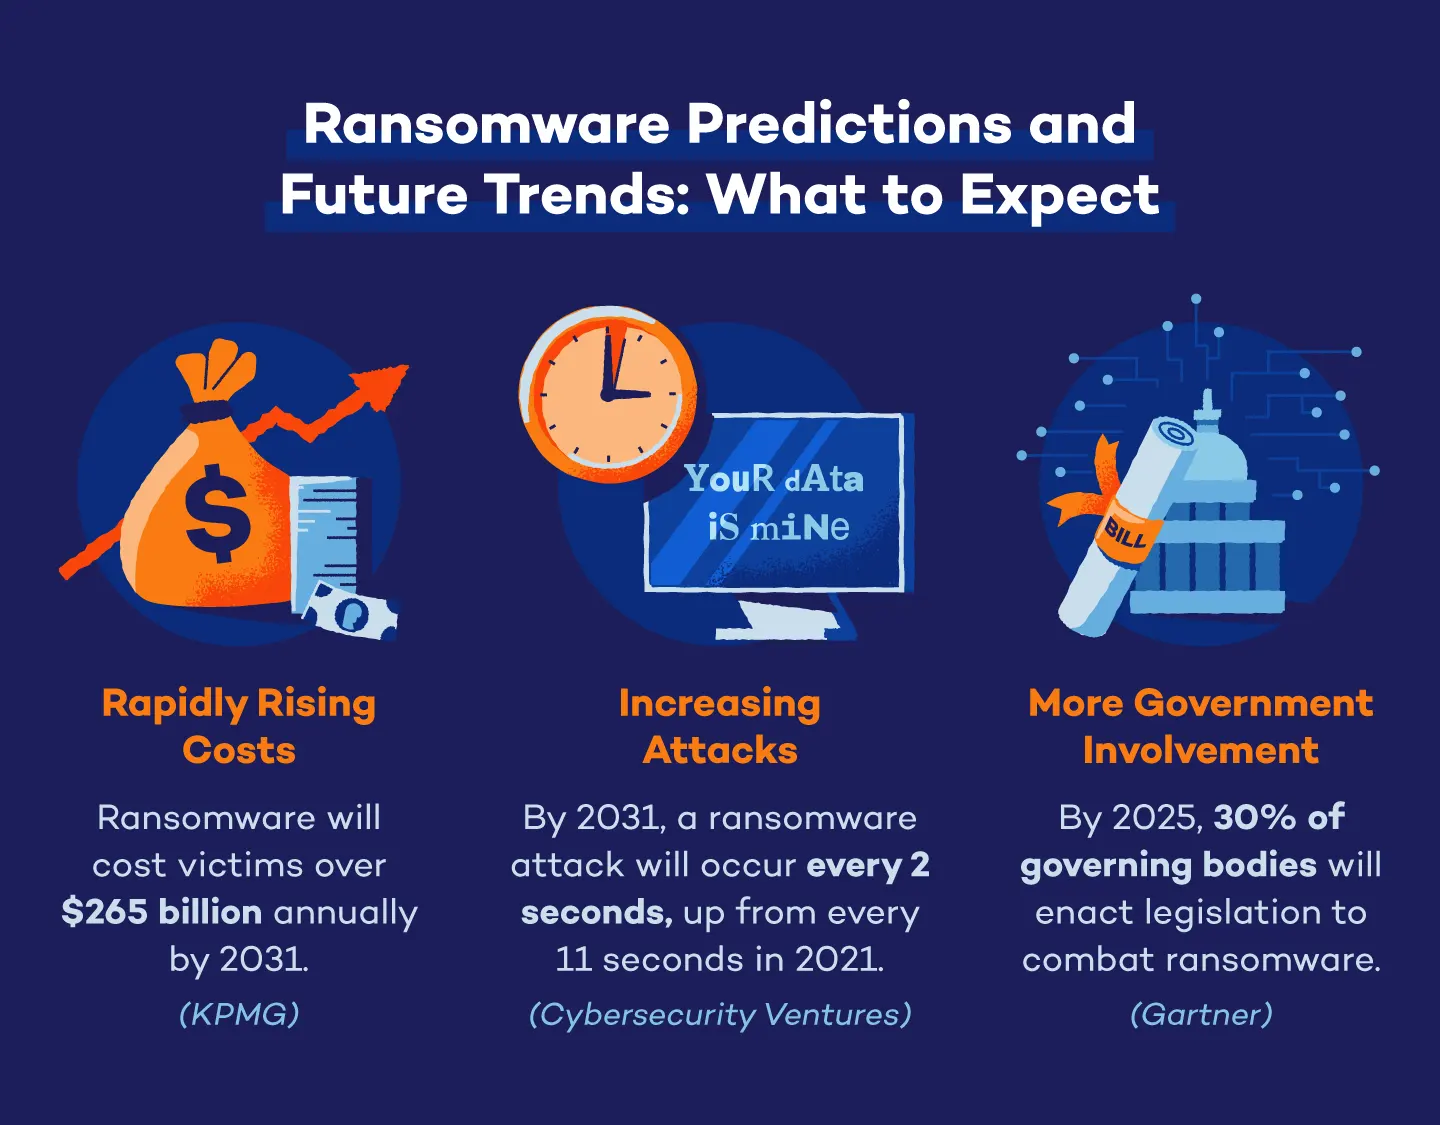 Graphic of ransomware predictions and future trends with three possibilities to expect for the coming years.